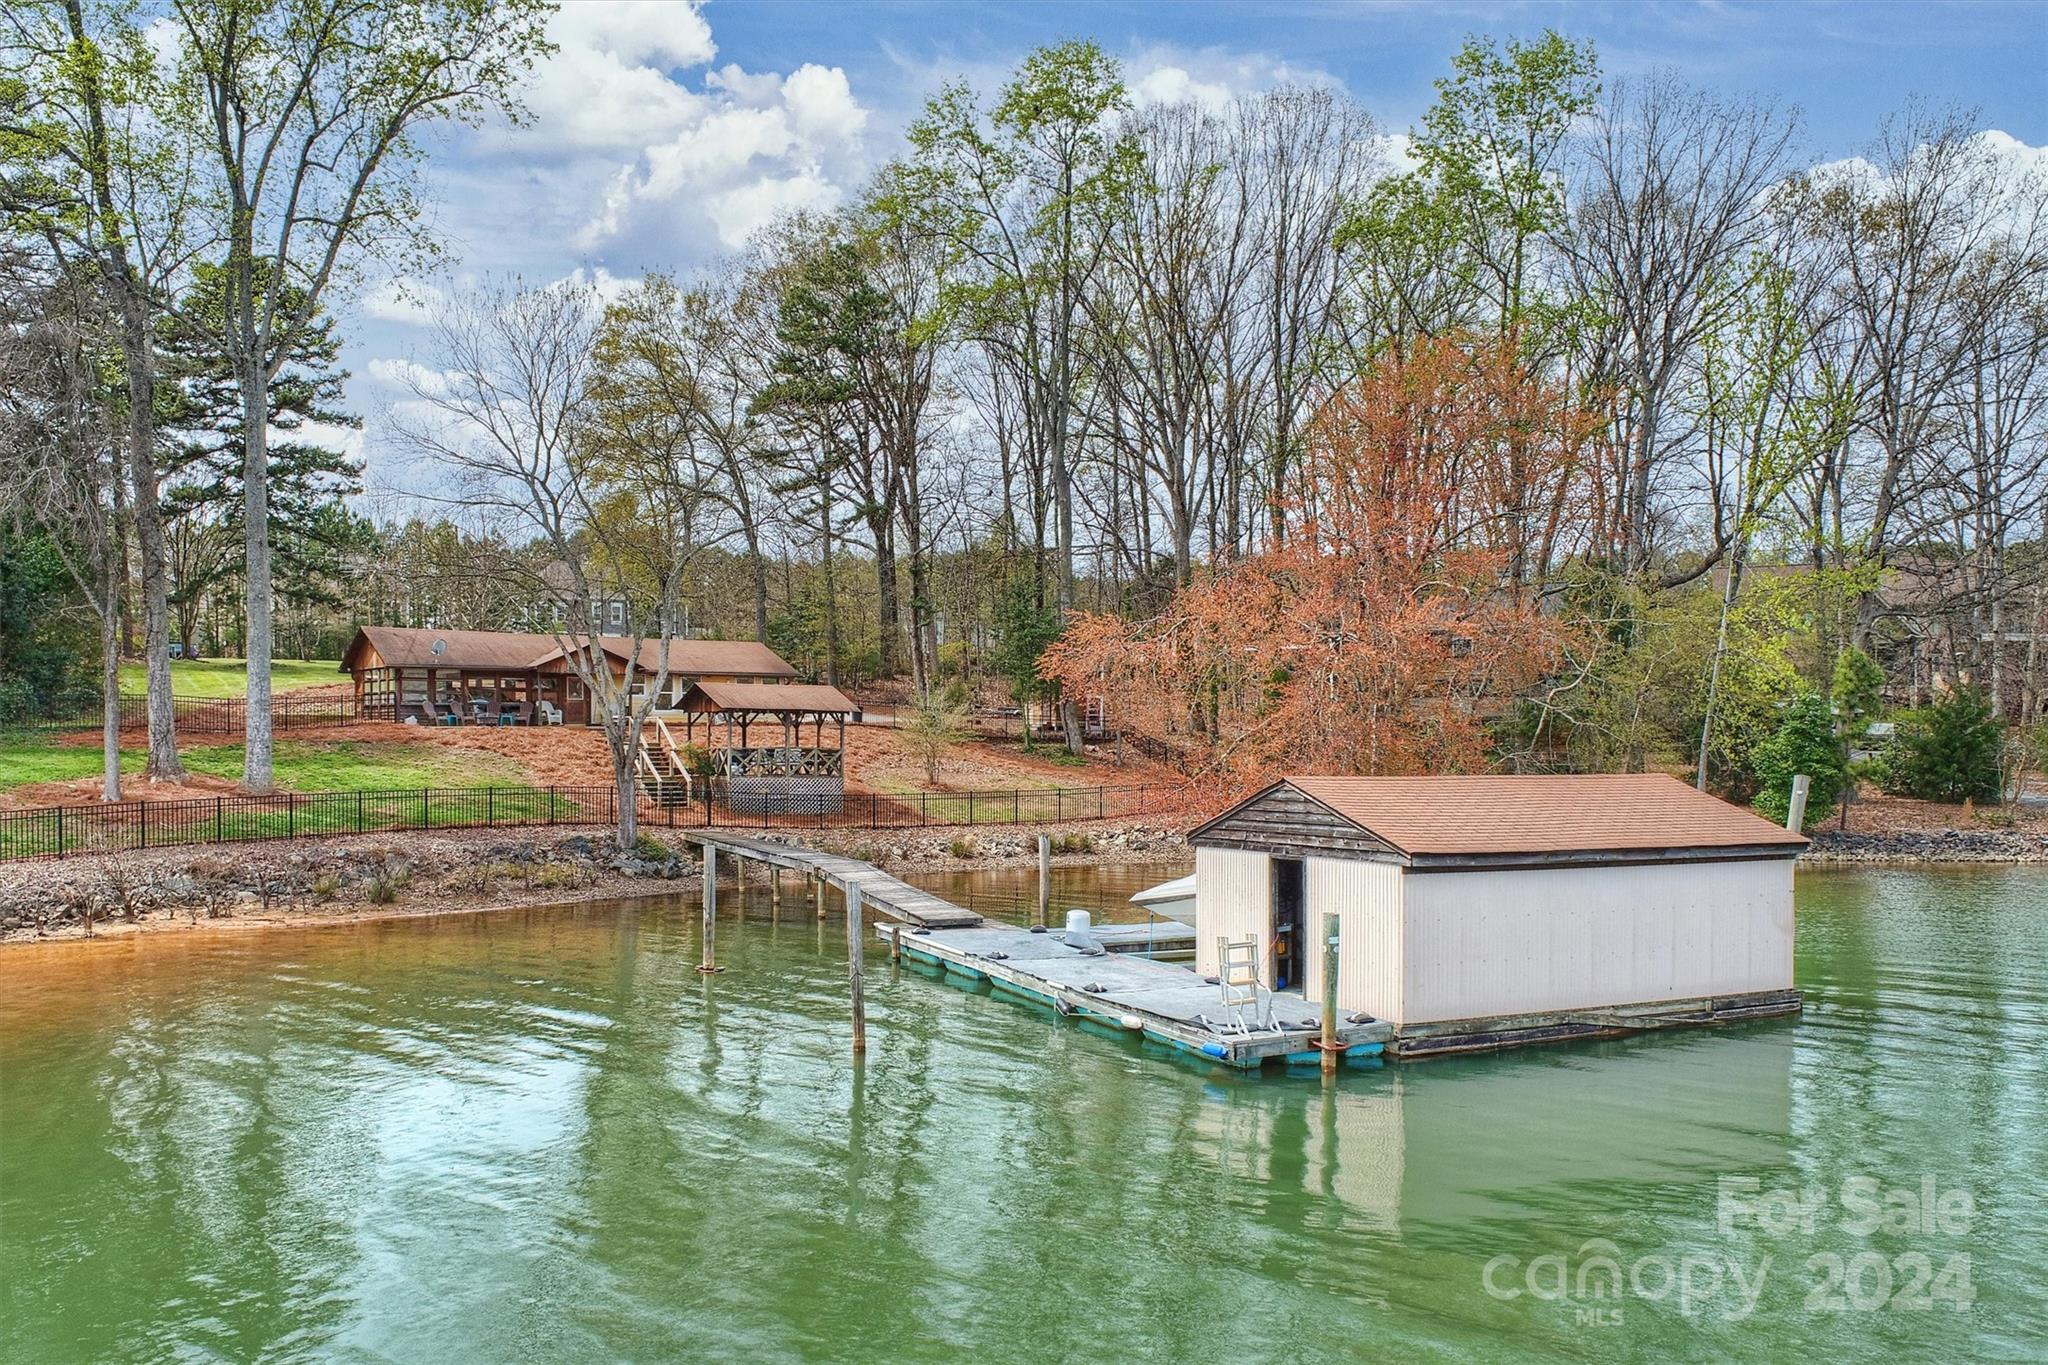 a view of a lake with a house in the background